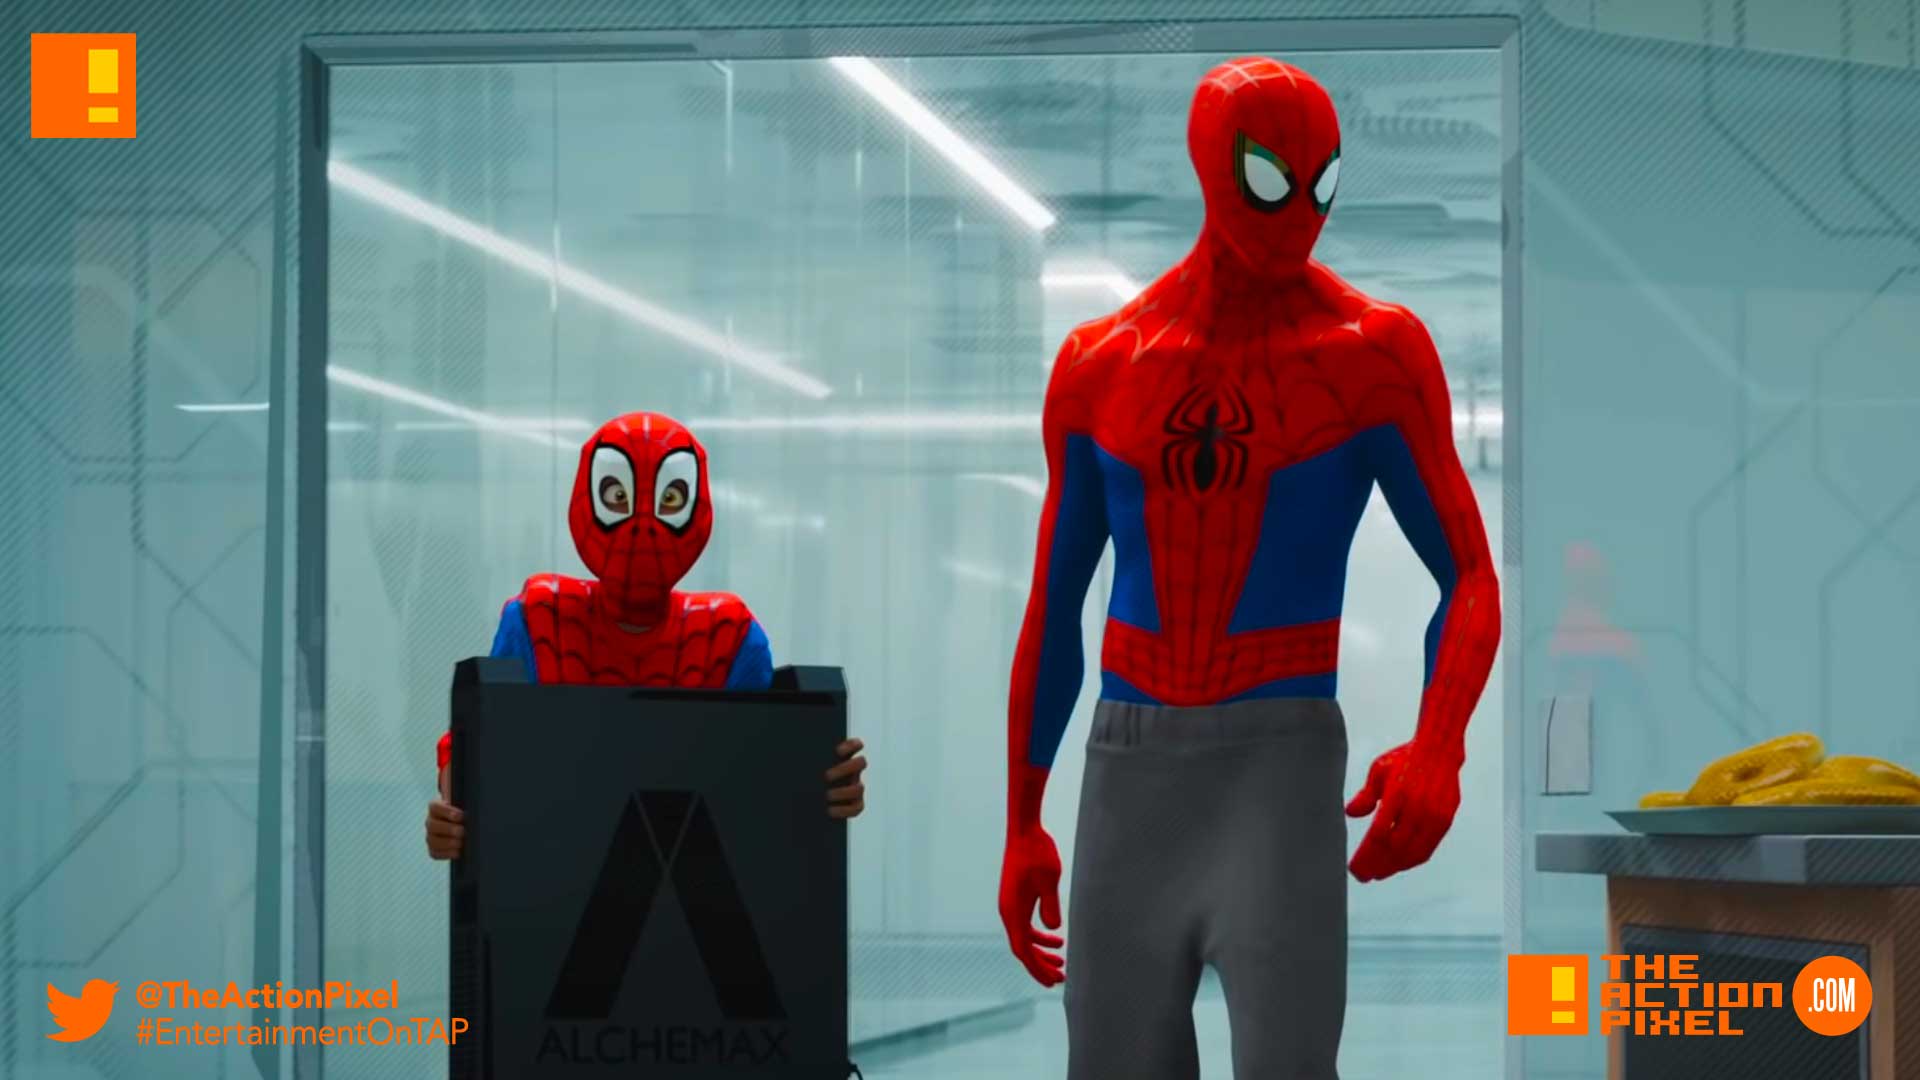 miles morales, spiderman, spider man, spider-man, sony, marvel, marvel comics, animated feature, animation, the action pixel, entertainment on tap,sony animation, marvel,into the spiderverse, spider-man: into the spider-verse,gwen stacey, clip, another dimension, sony animation